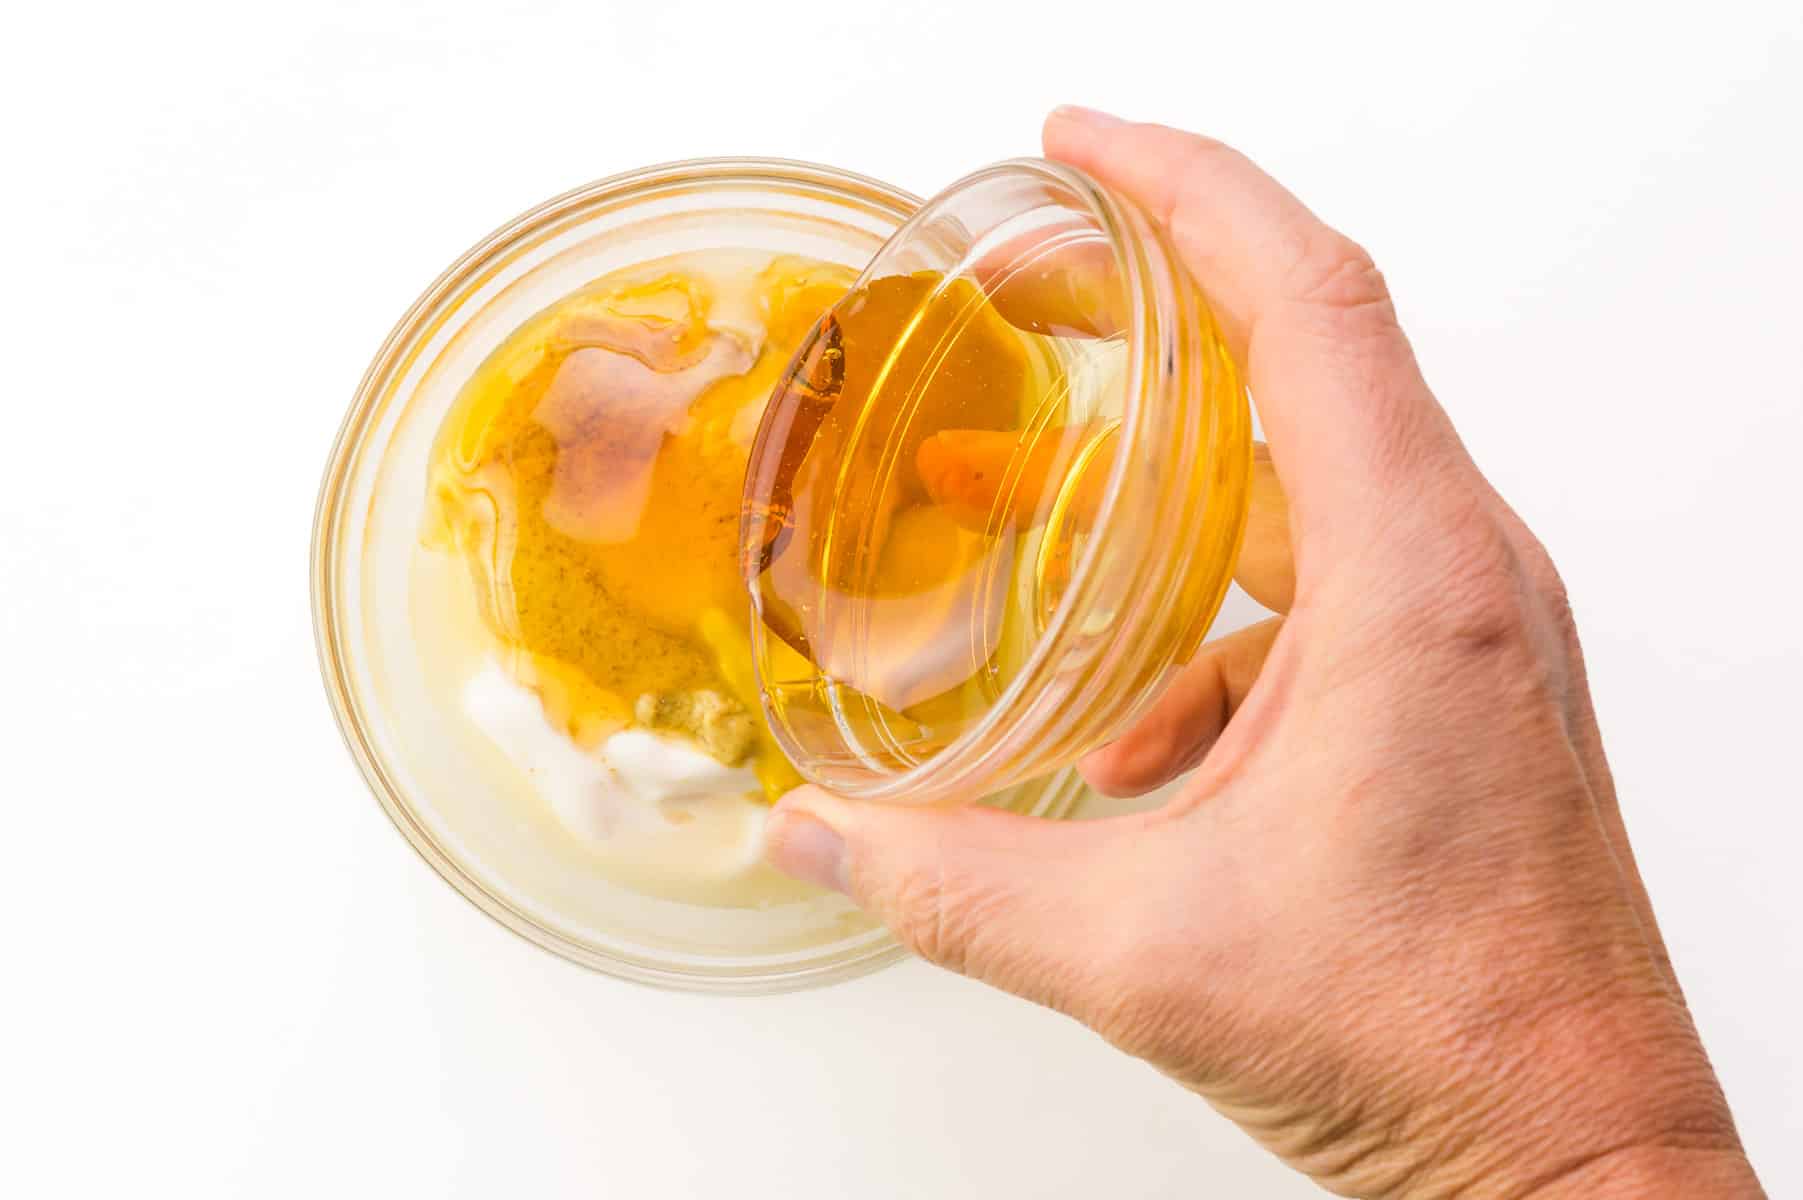 A hand holds a bowl of honey, pouring it into a bowl with mayo and mustard.